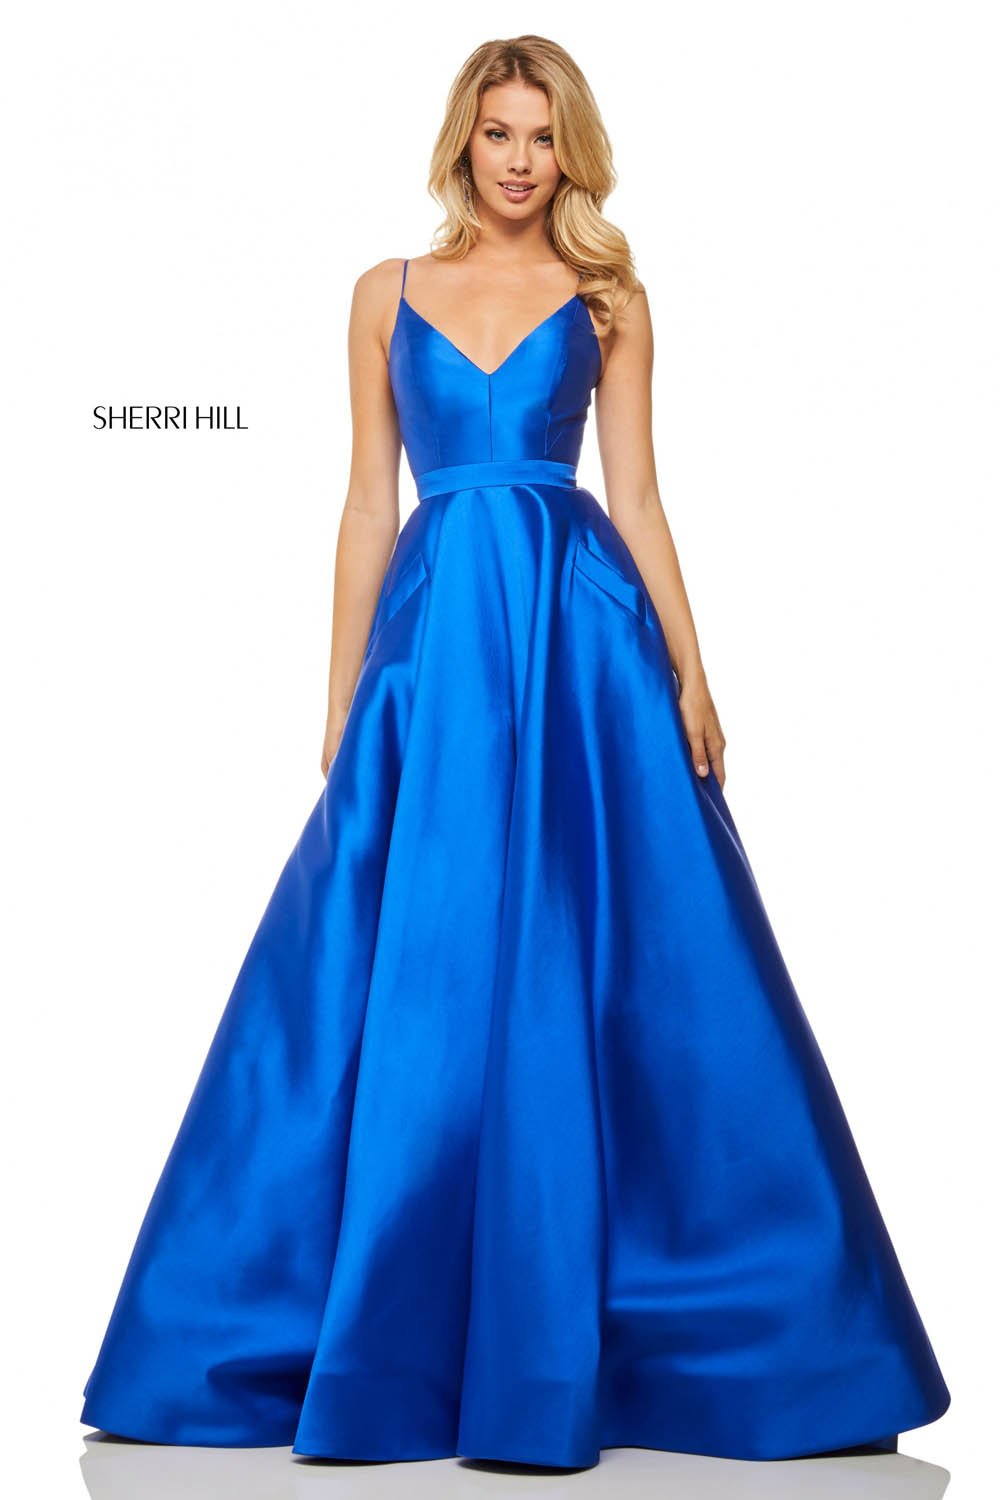 Sherri Hill 52821 dress images in these colors: Yellow, Coral, Lilac, Navy, Red, Turquoise, Aqua, Royal, Pink, Light Blue.